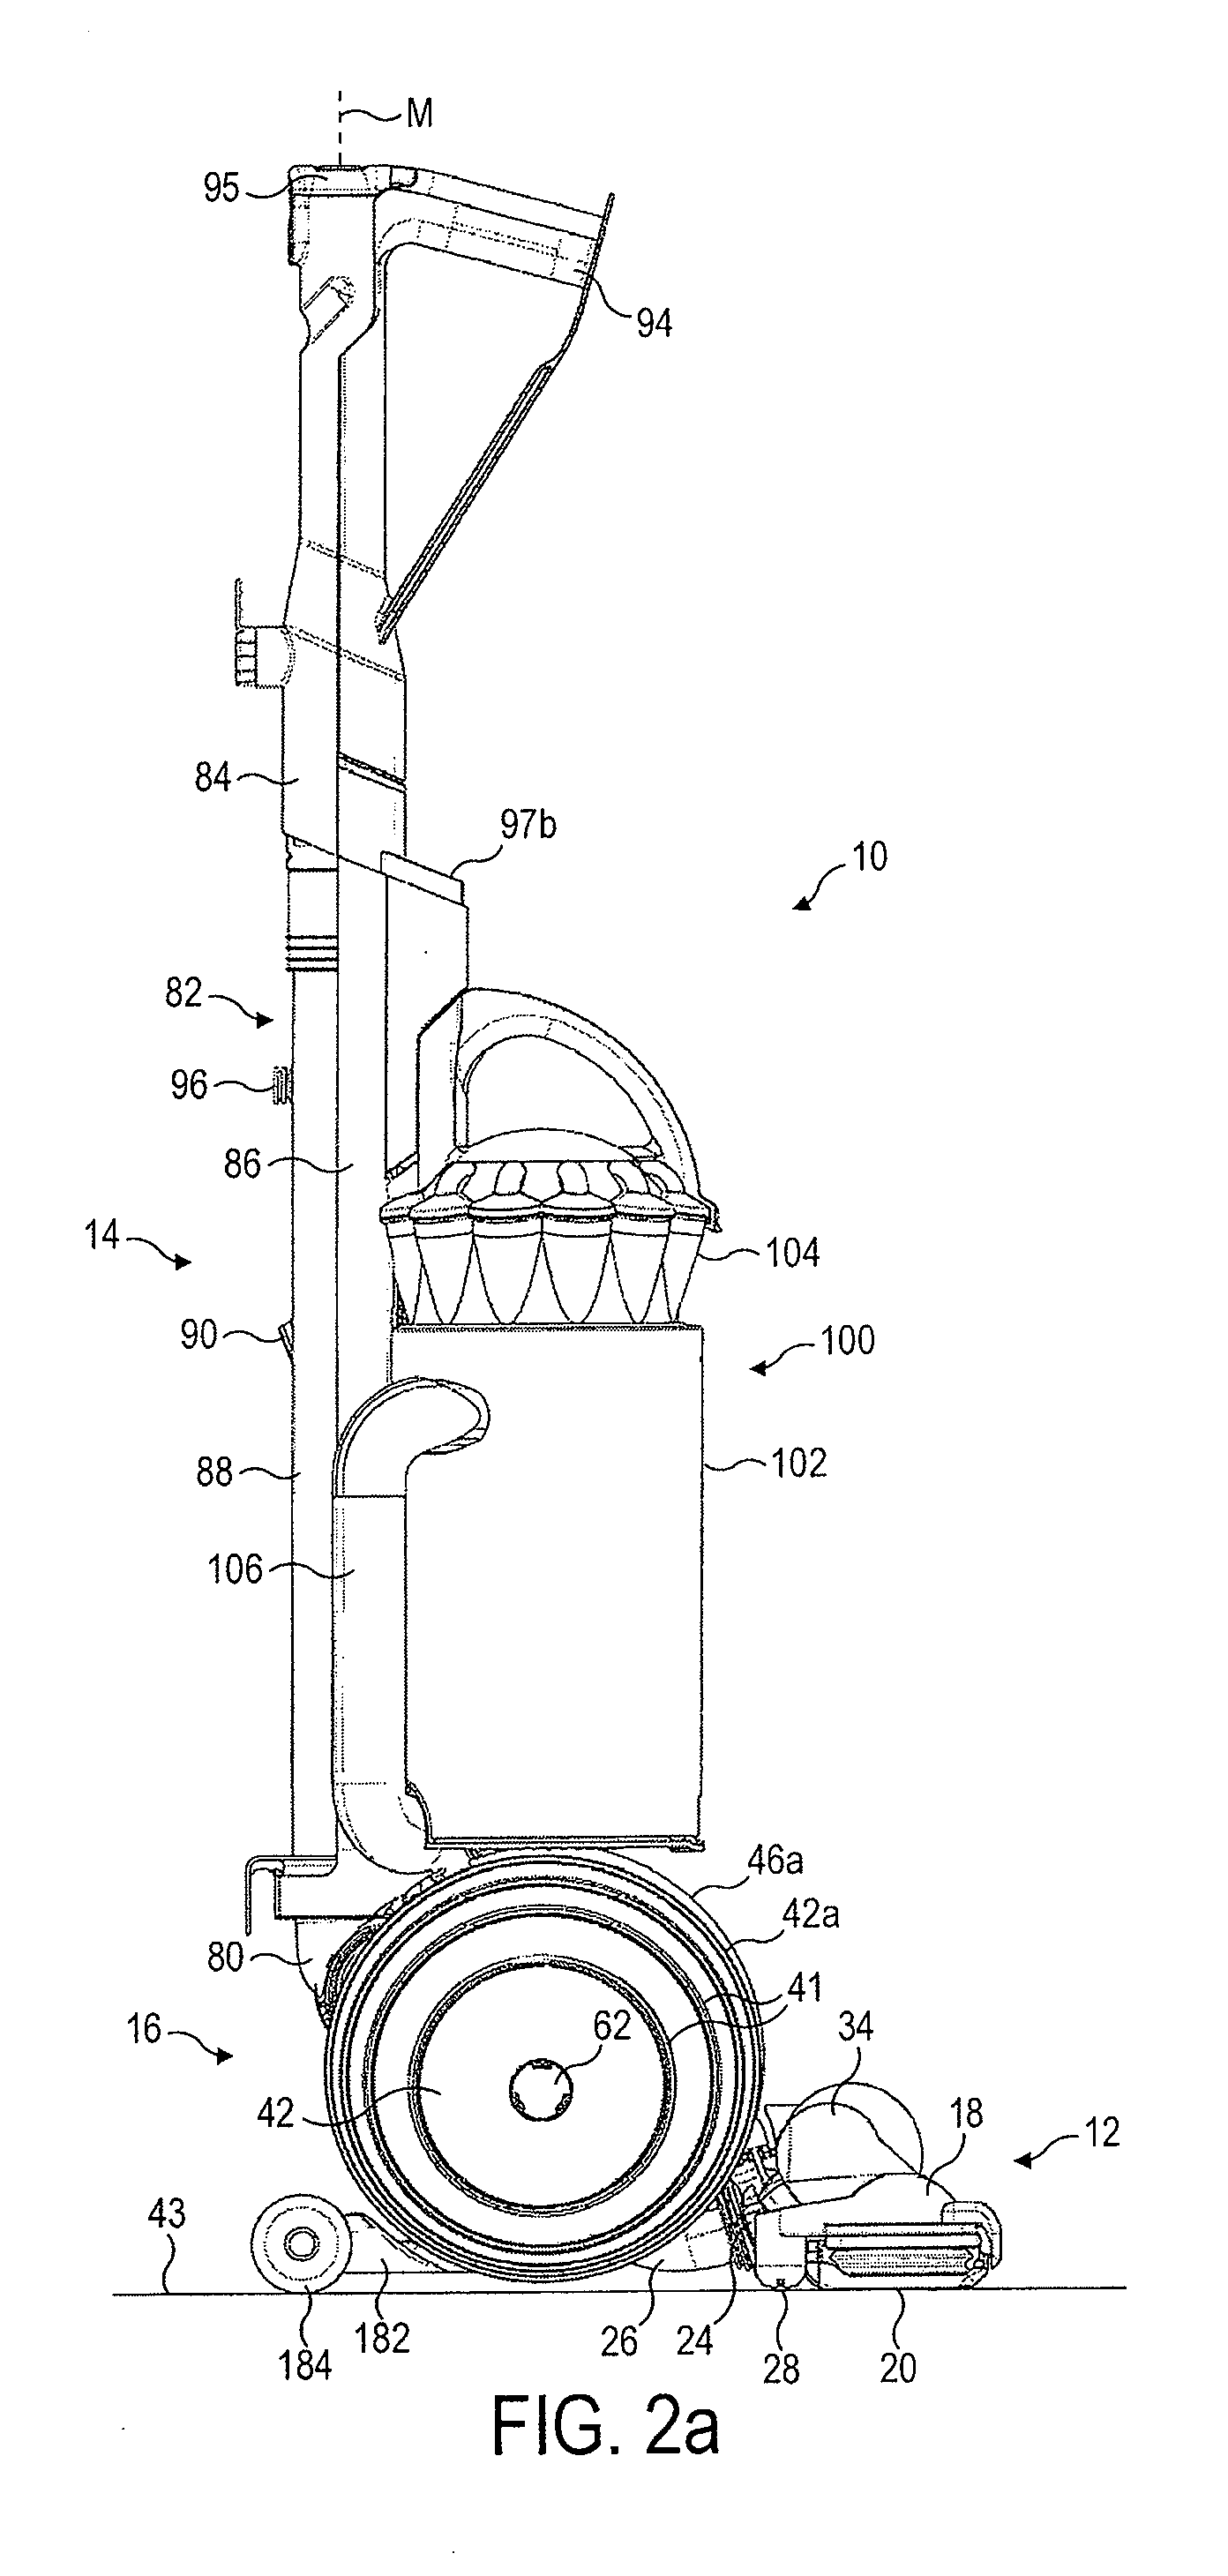 Surface treating appliance